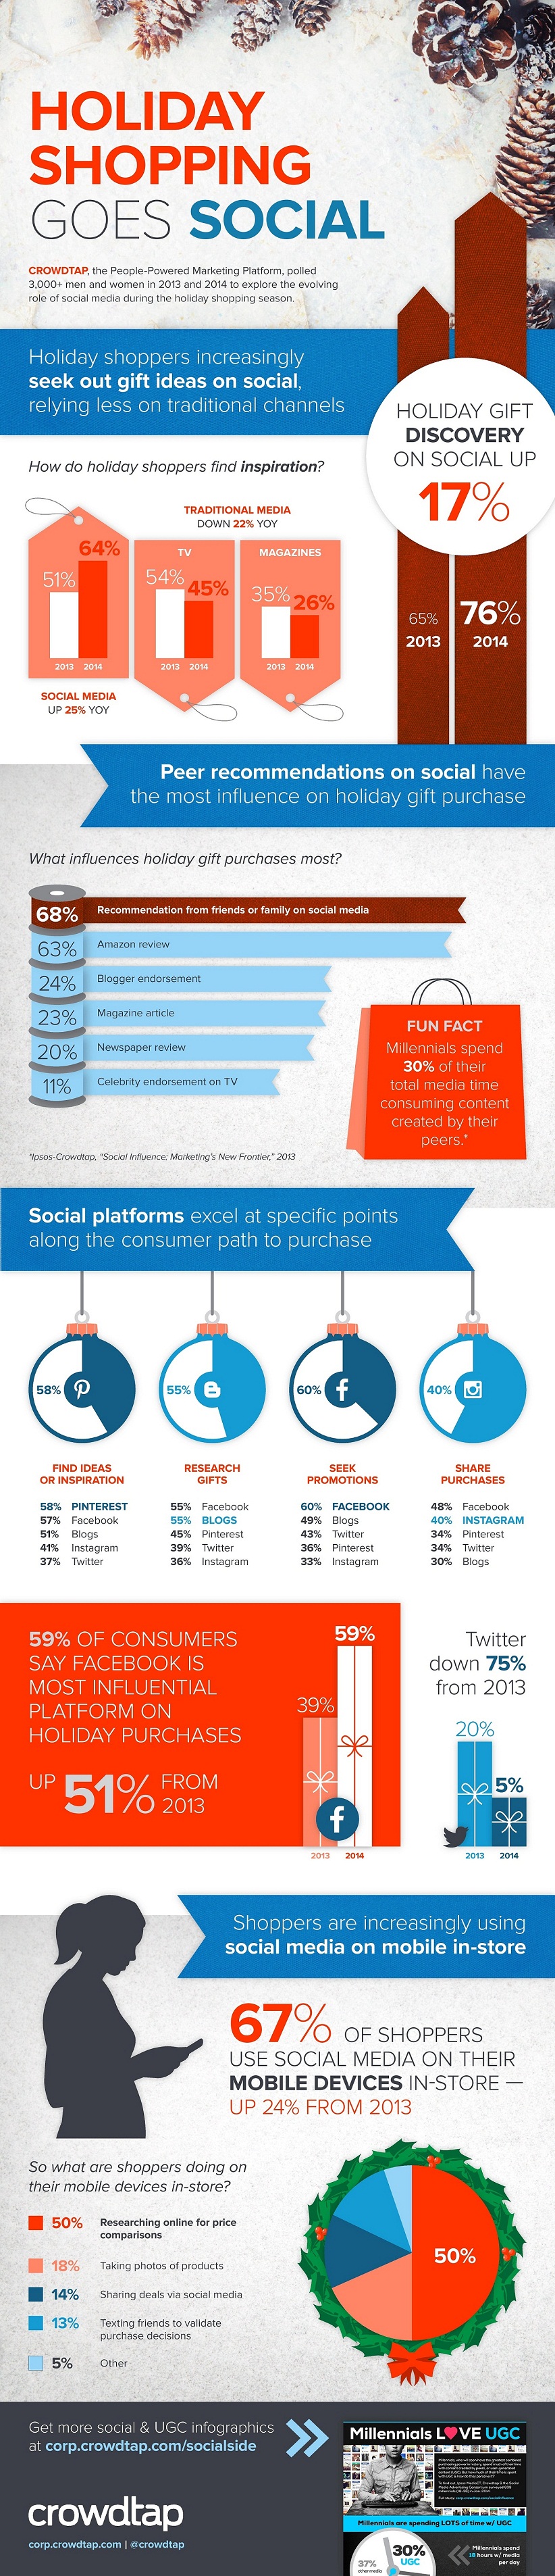 Infographie 169 - Holiday-Shopping-Goes-Social-Infographic